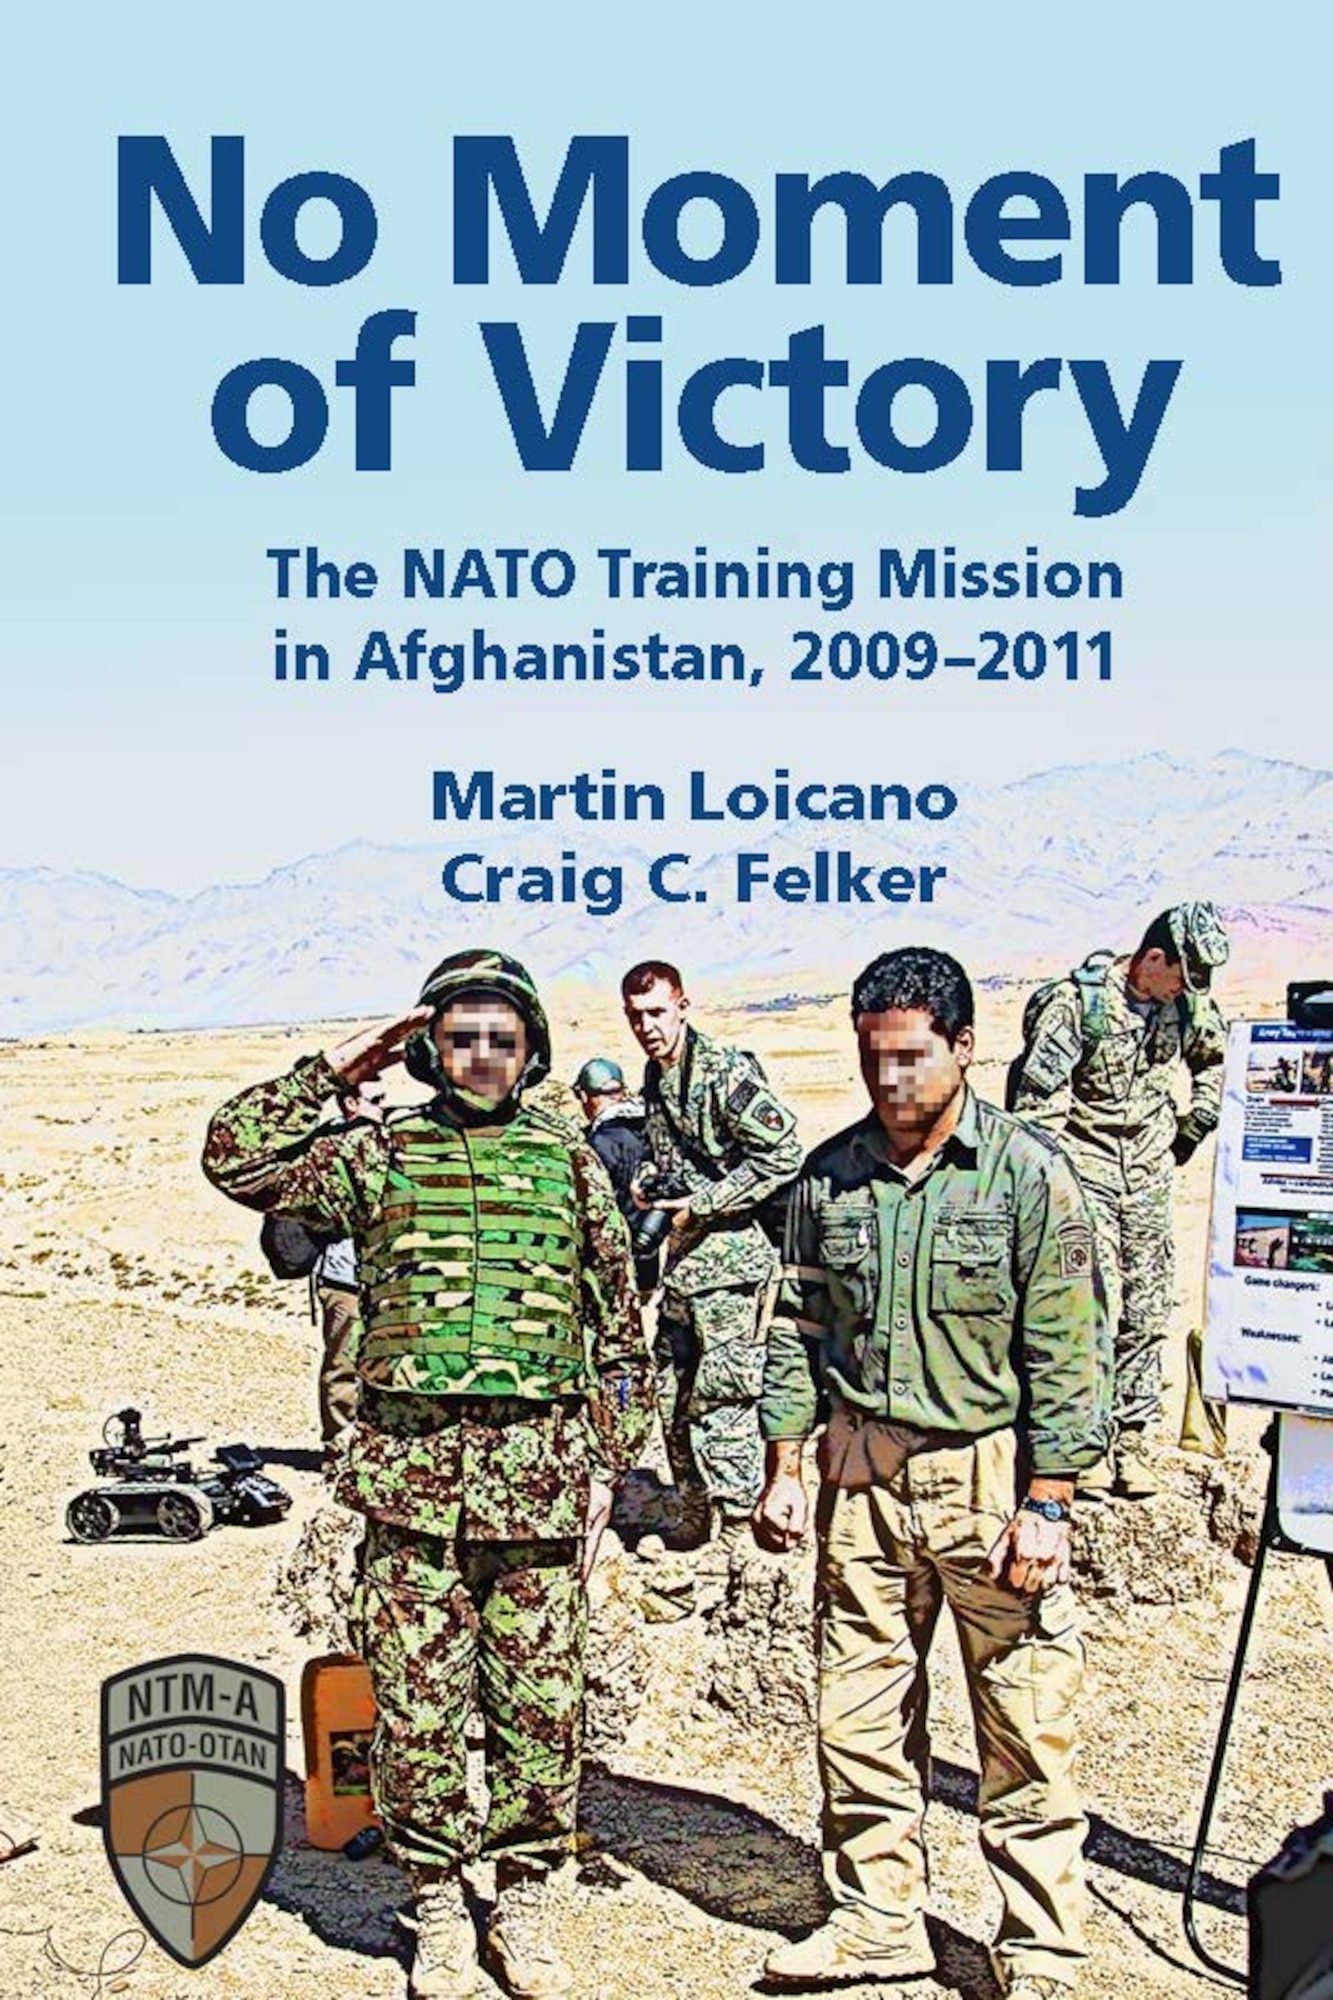 In No Moment of Victory: The NATO Training Mission in Afghanistan, 2009–2011, authors Martin Loicano and Craig C. Felker examine NATO coalition efforts to build Afghan Army and police forces with the objective of transitioning the war to Afghan control. (Image by Air University Press)